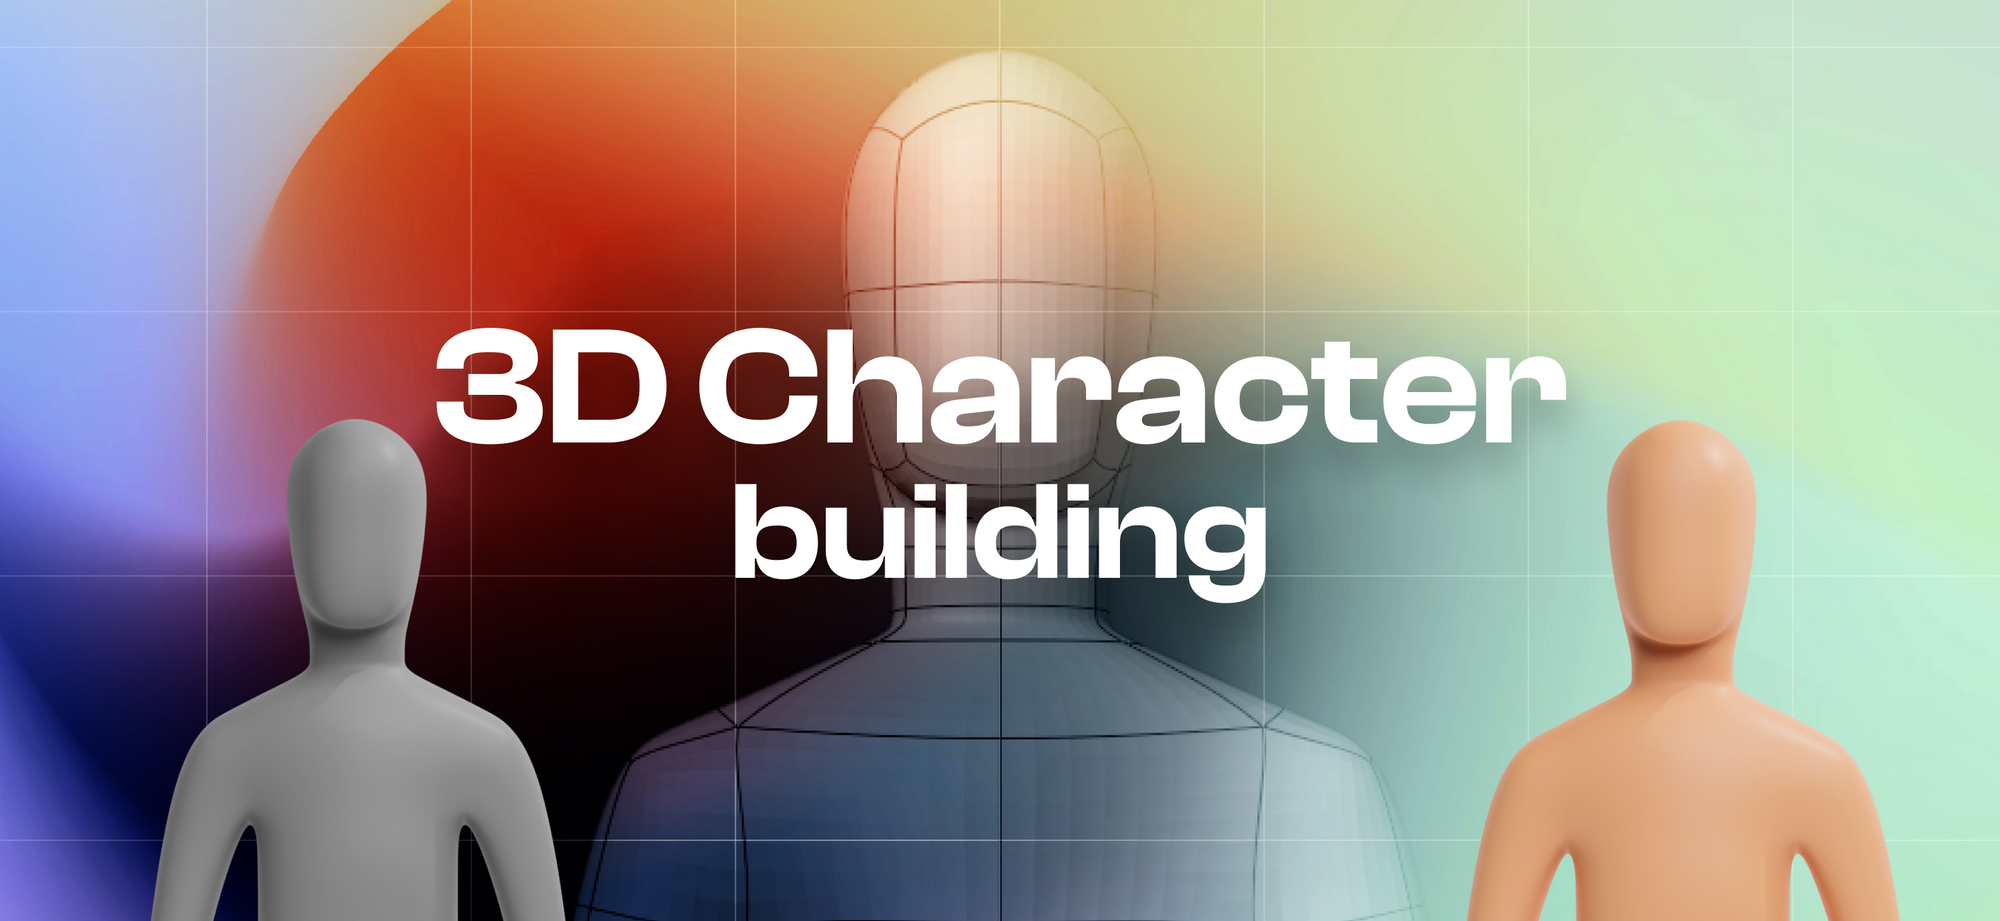 How To Model a 3D Human In Blender - IconScout Blogs